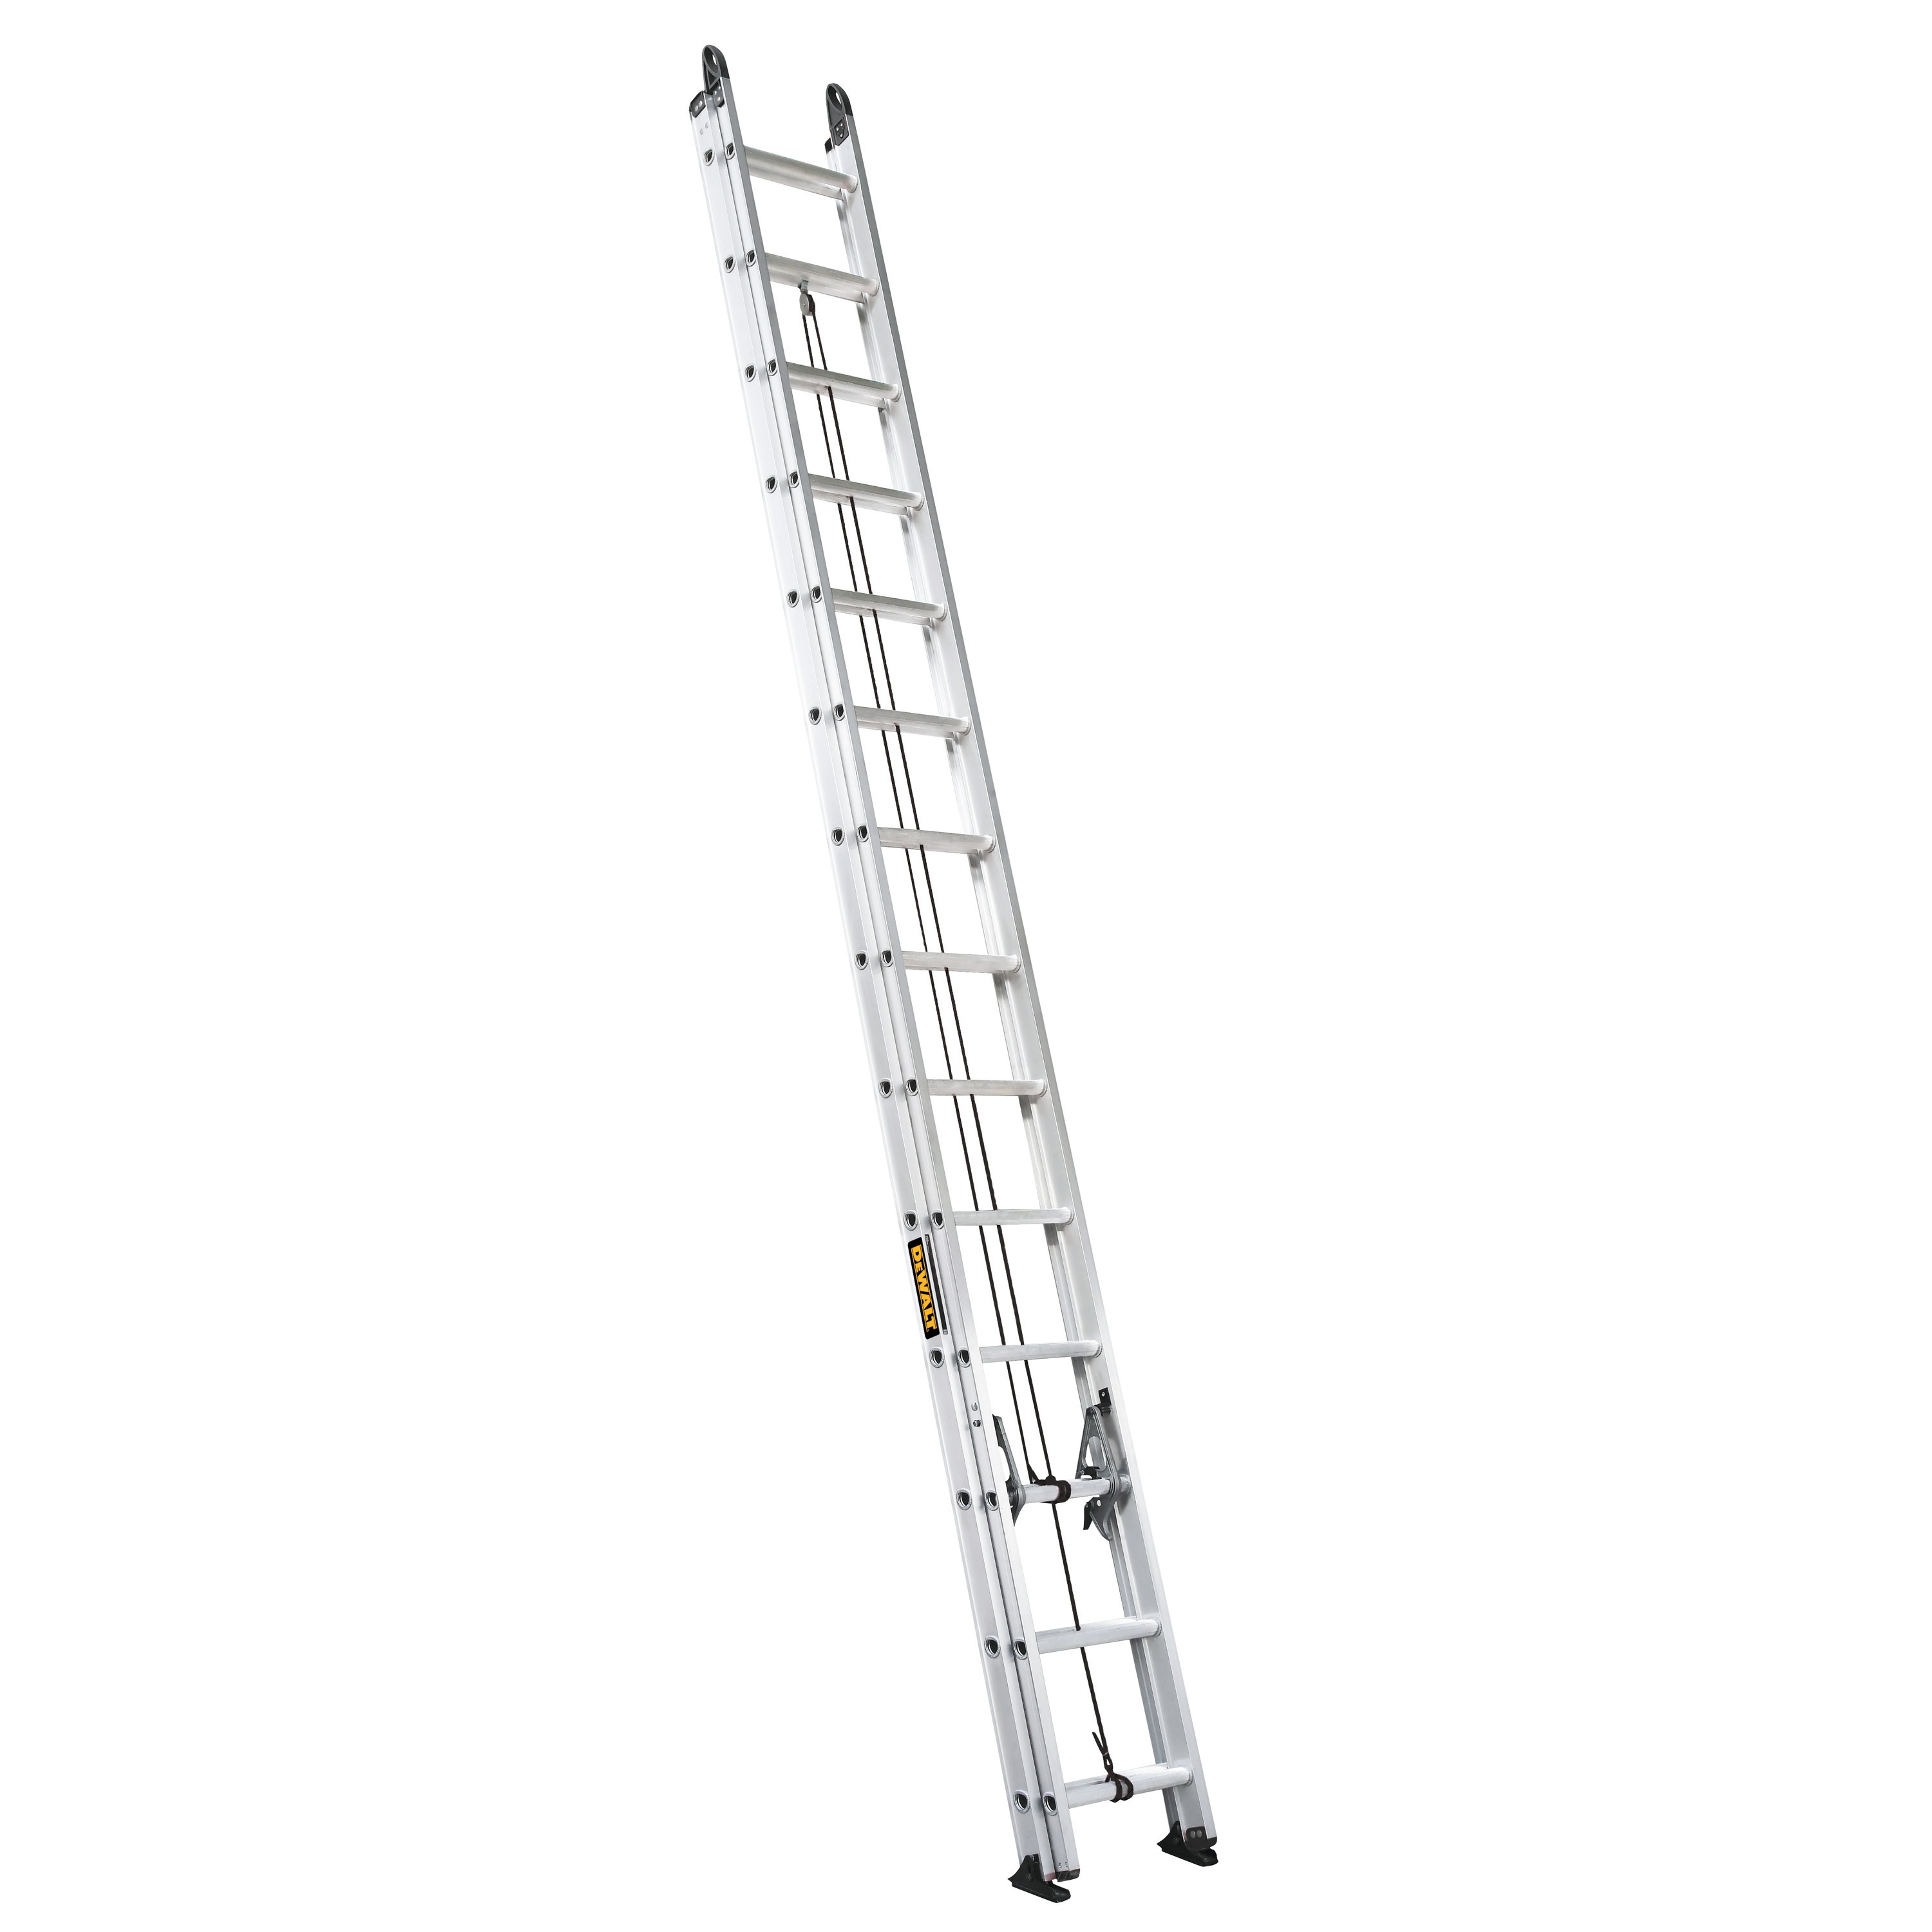 27 foot Aluminum 250 pound Type 1 Extension Ladder.